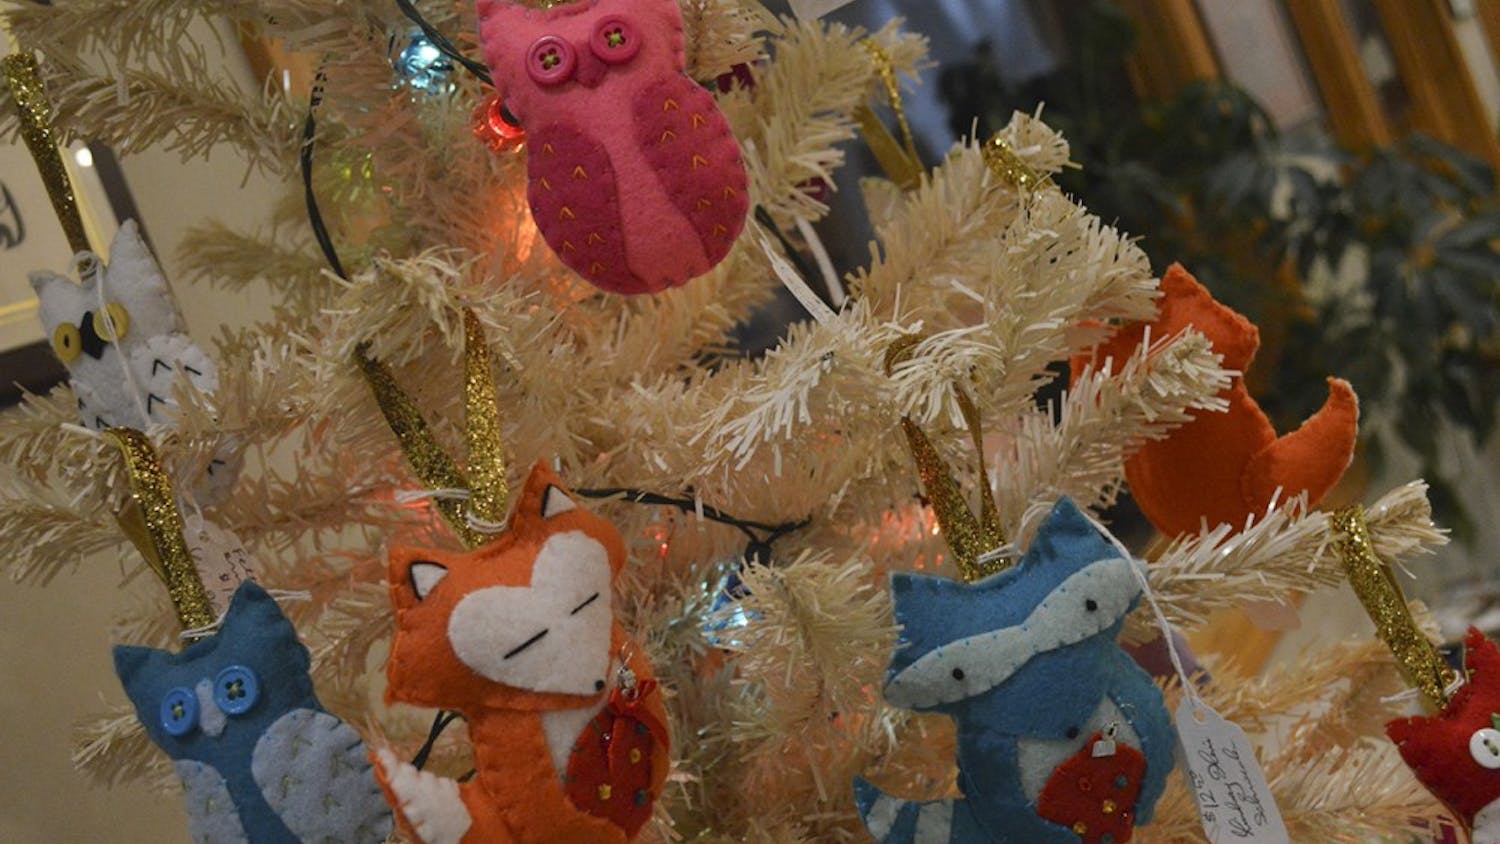 Throughout the month of December Lindsay Hine Schroeder will be selling handcrafted felt ornaments at the College Mall Veterinary Hospital where 90% of the proceeds will go to WildCare, Inc. 